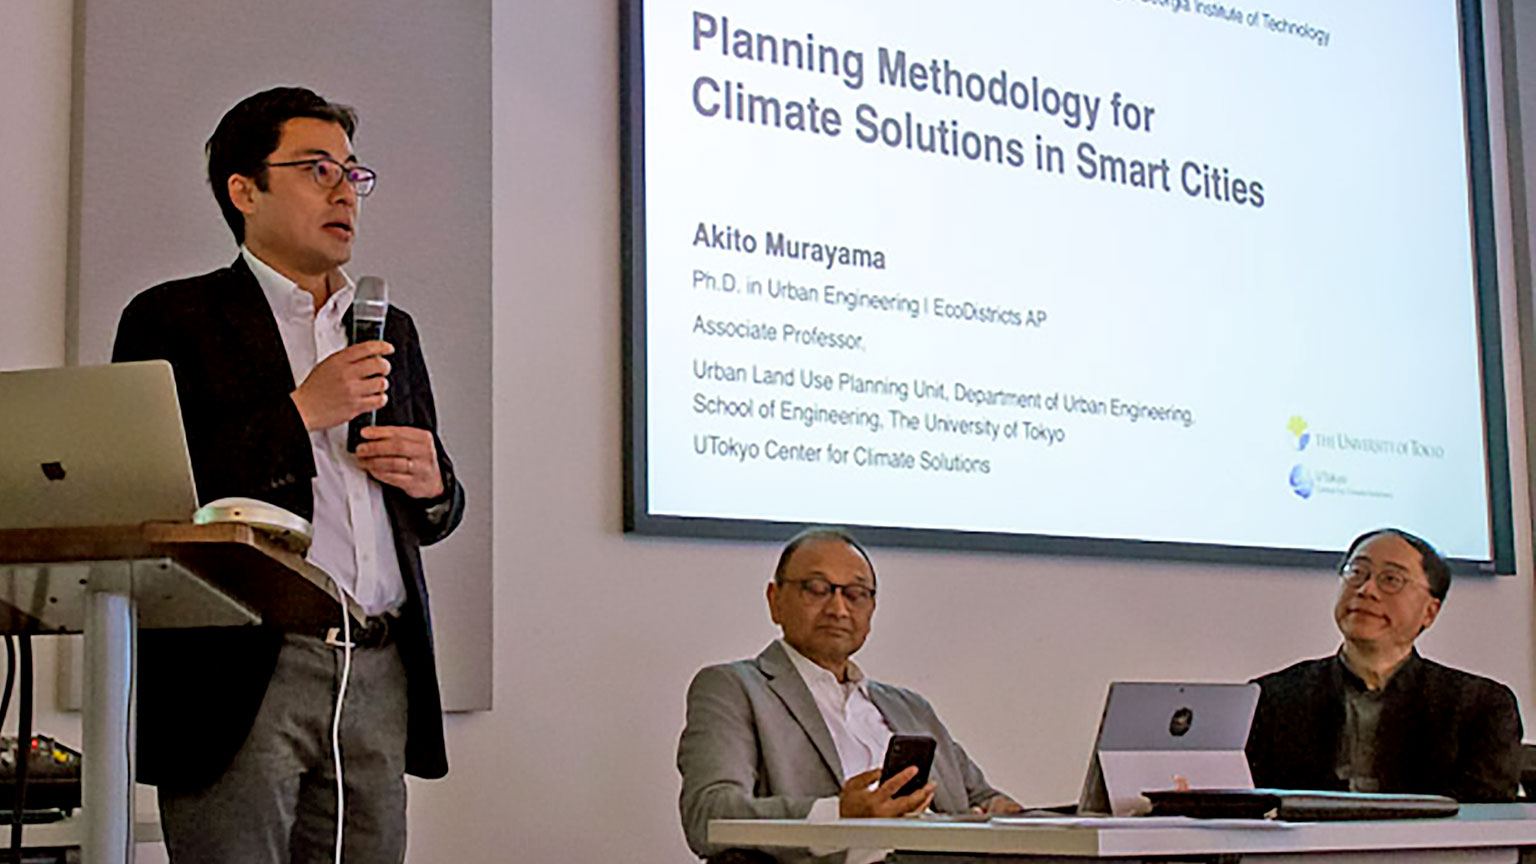 Smart Cities Systems Design panelist presents research.